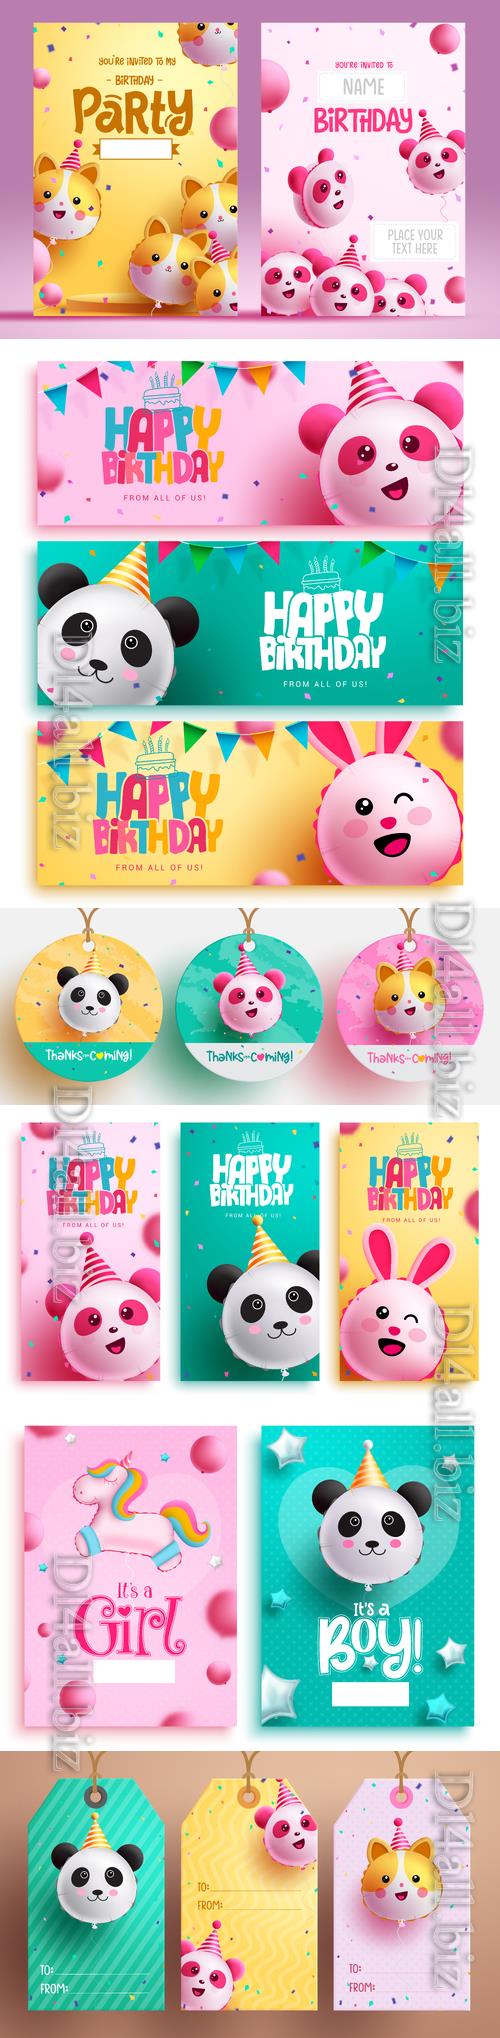 Happy birthday vector banner set,  birthday greeting card with inflatable character